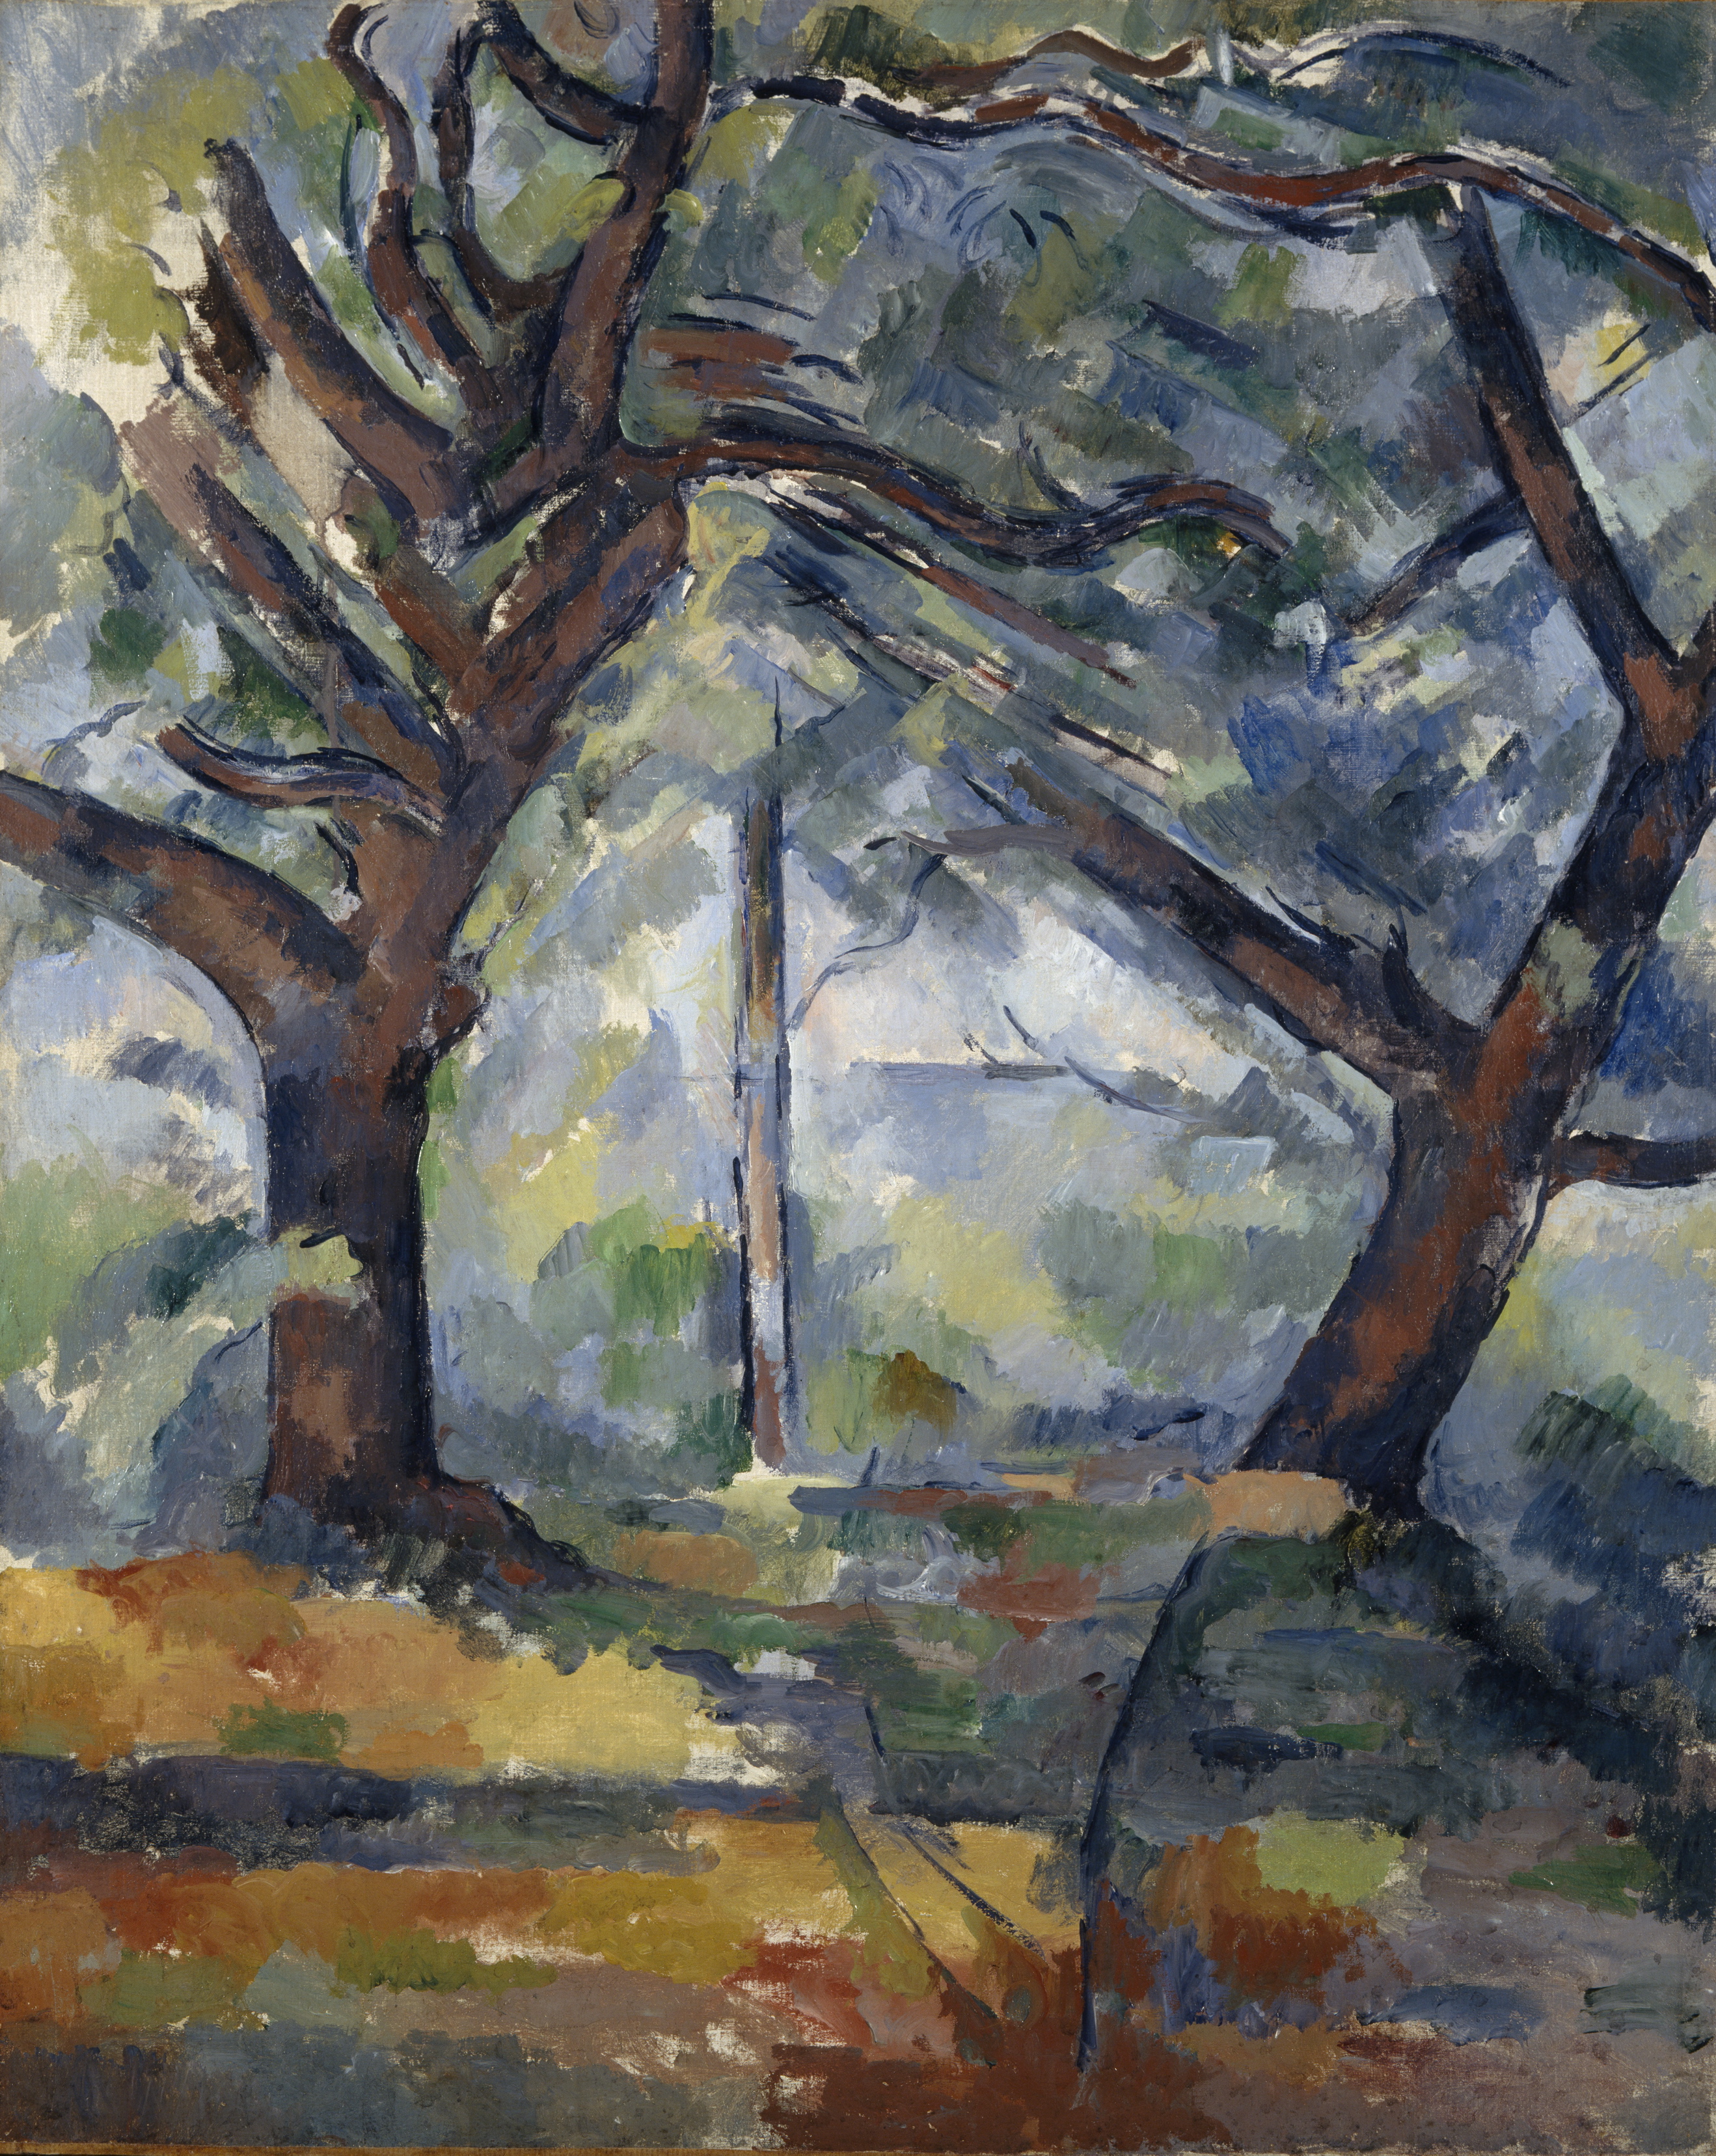 Paul Cezanne The big trees c1904 oil on canvas 81 x 65 cm Scottish National Gallery, Edinburgh © Trustees of the National Galleries of Scotland ***This image may only be used in conjunction with editorial coverage of The Greats exhibition, 24 Oct 2015 - 14 Feb 2016, at the Art Gallery of New South Wales. This image may not be cropped or overwritten. Prior approval in writing required for use as a cover. Caption details must accompany reproduction of the image. *** Media contact: Lisa.Catt@ag.nsw.gov.au *** Local Caption *** ***This image may only be used in conjunction with editorial coverage of The Greats exhibition, 24 Oct 2015 - 14 Feb 2016, at the Art Gallery of New South Wales. This image may not be cropped or overwritten. Prior approval in writing required for use as a cover. Caption details must accompany reproduction of the image. *** Media contact: Lisa.Catt@ag.nsw.gov.au